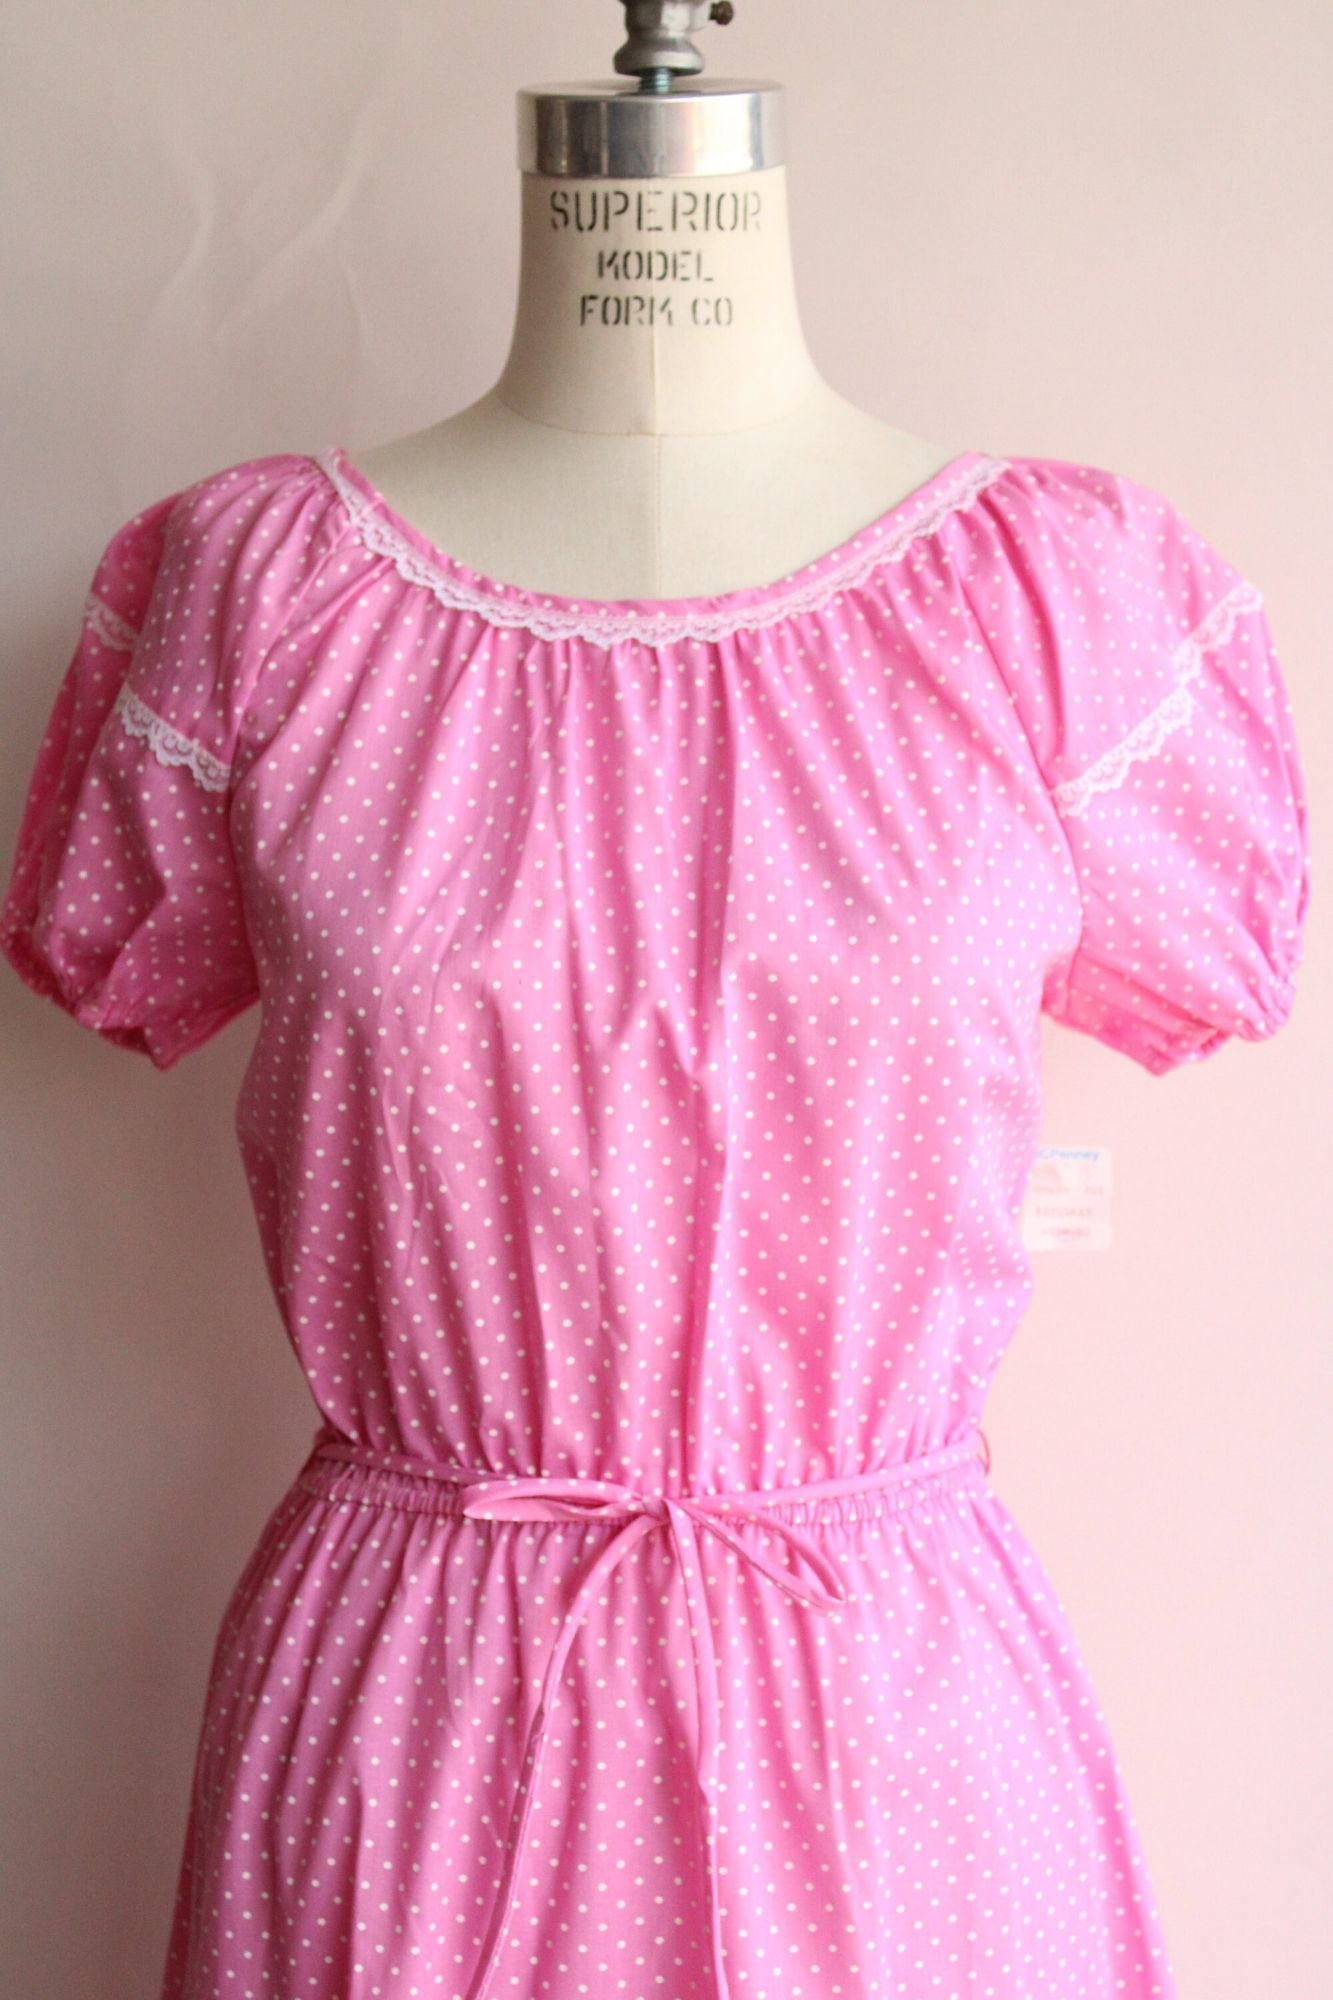 Vintage 1980's Pink Polka Dot Dress with Belt, New with Tags